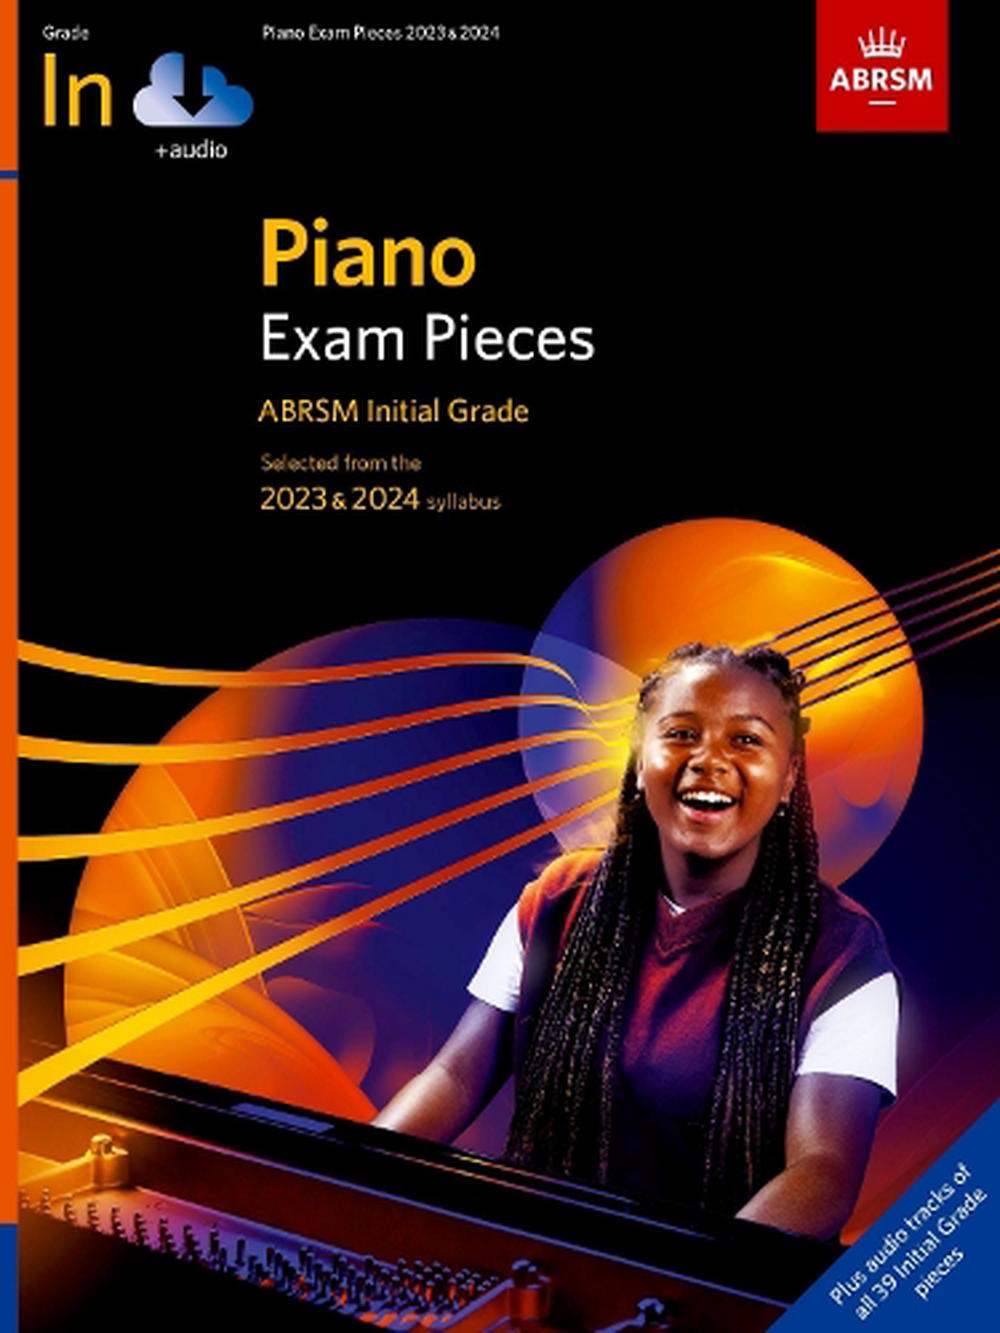 Piano Exam Pieces 2023 & 2024, ABRSM Initial Grade, with audio by ABRSM